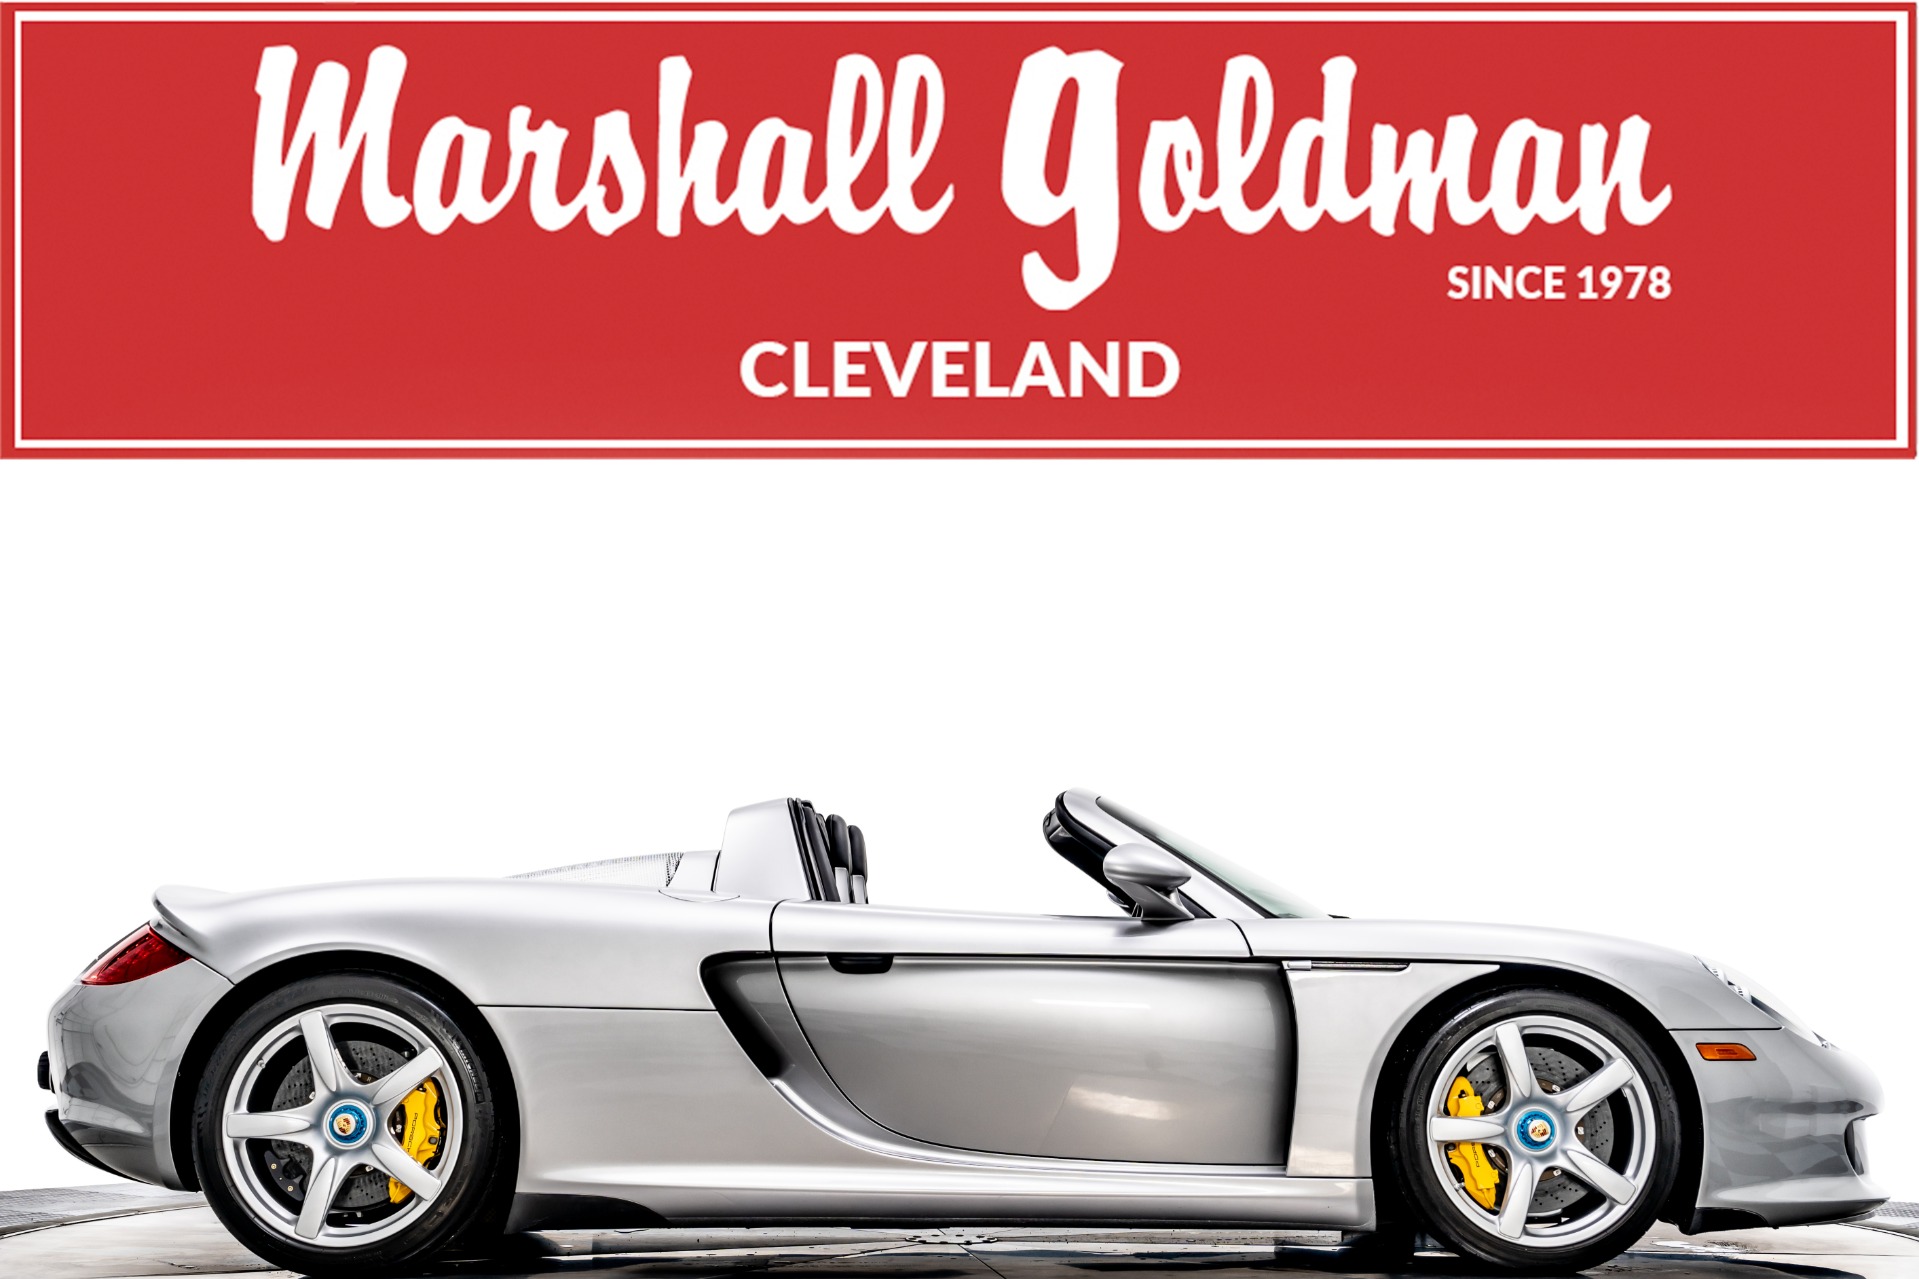 Used 2005 Porsche Carrera GT For Sale (Sold) | Marshall Goldman Cleveland  Stock #W20560